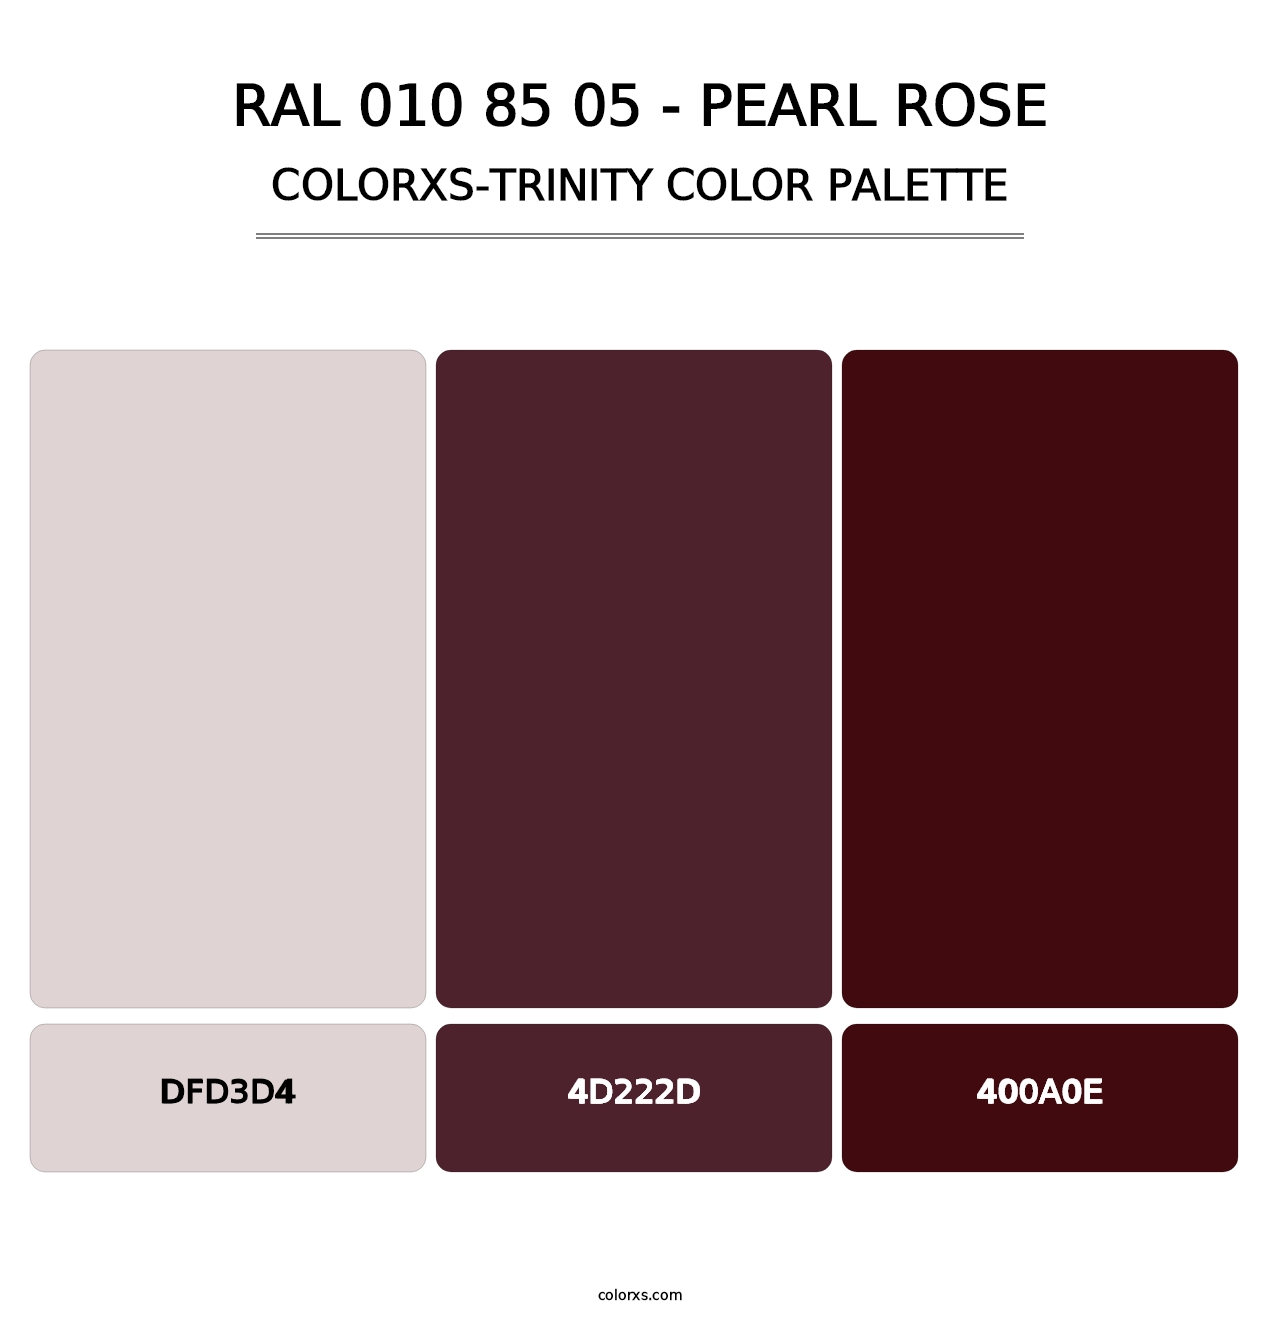 RAL 010 85 05 - Pearl Rose - Colorxs Trinity Palette